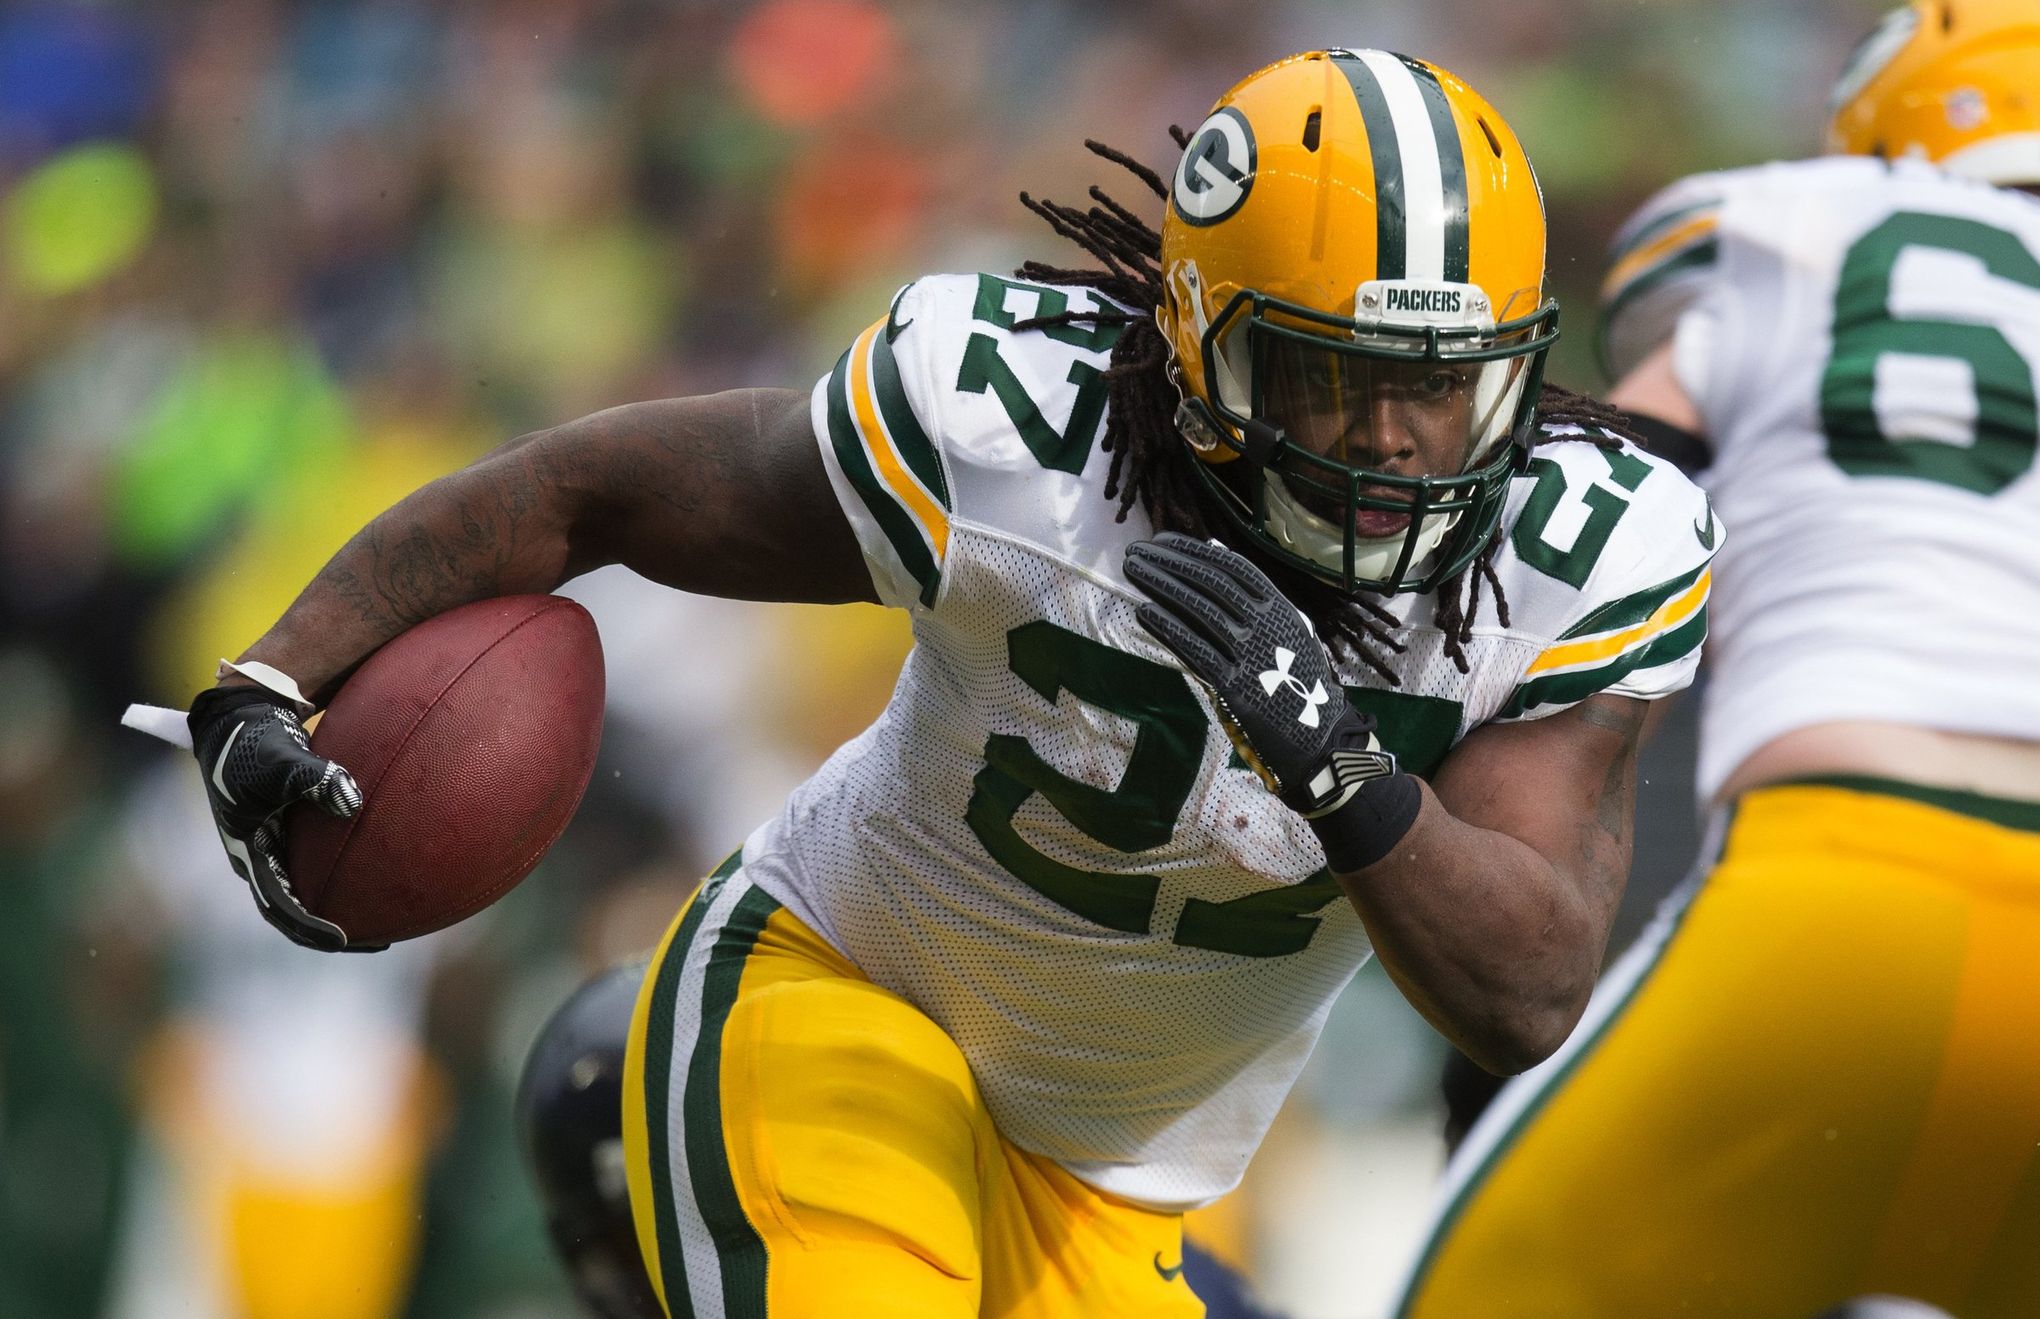 Packers rookie RB Eddie Lacy might have put on a few pounds in the offseason